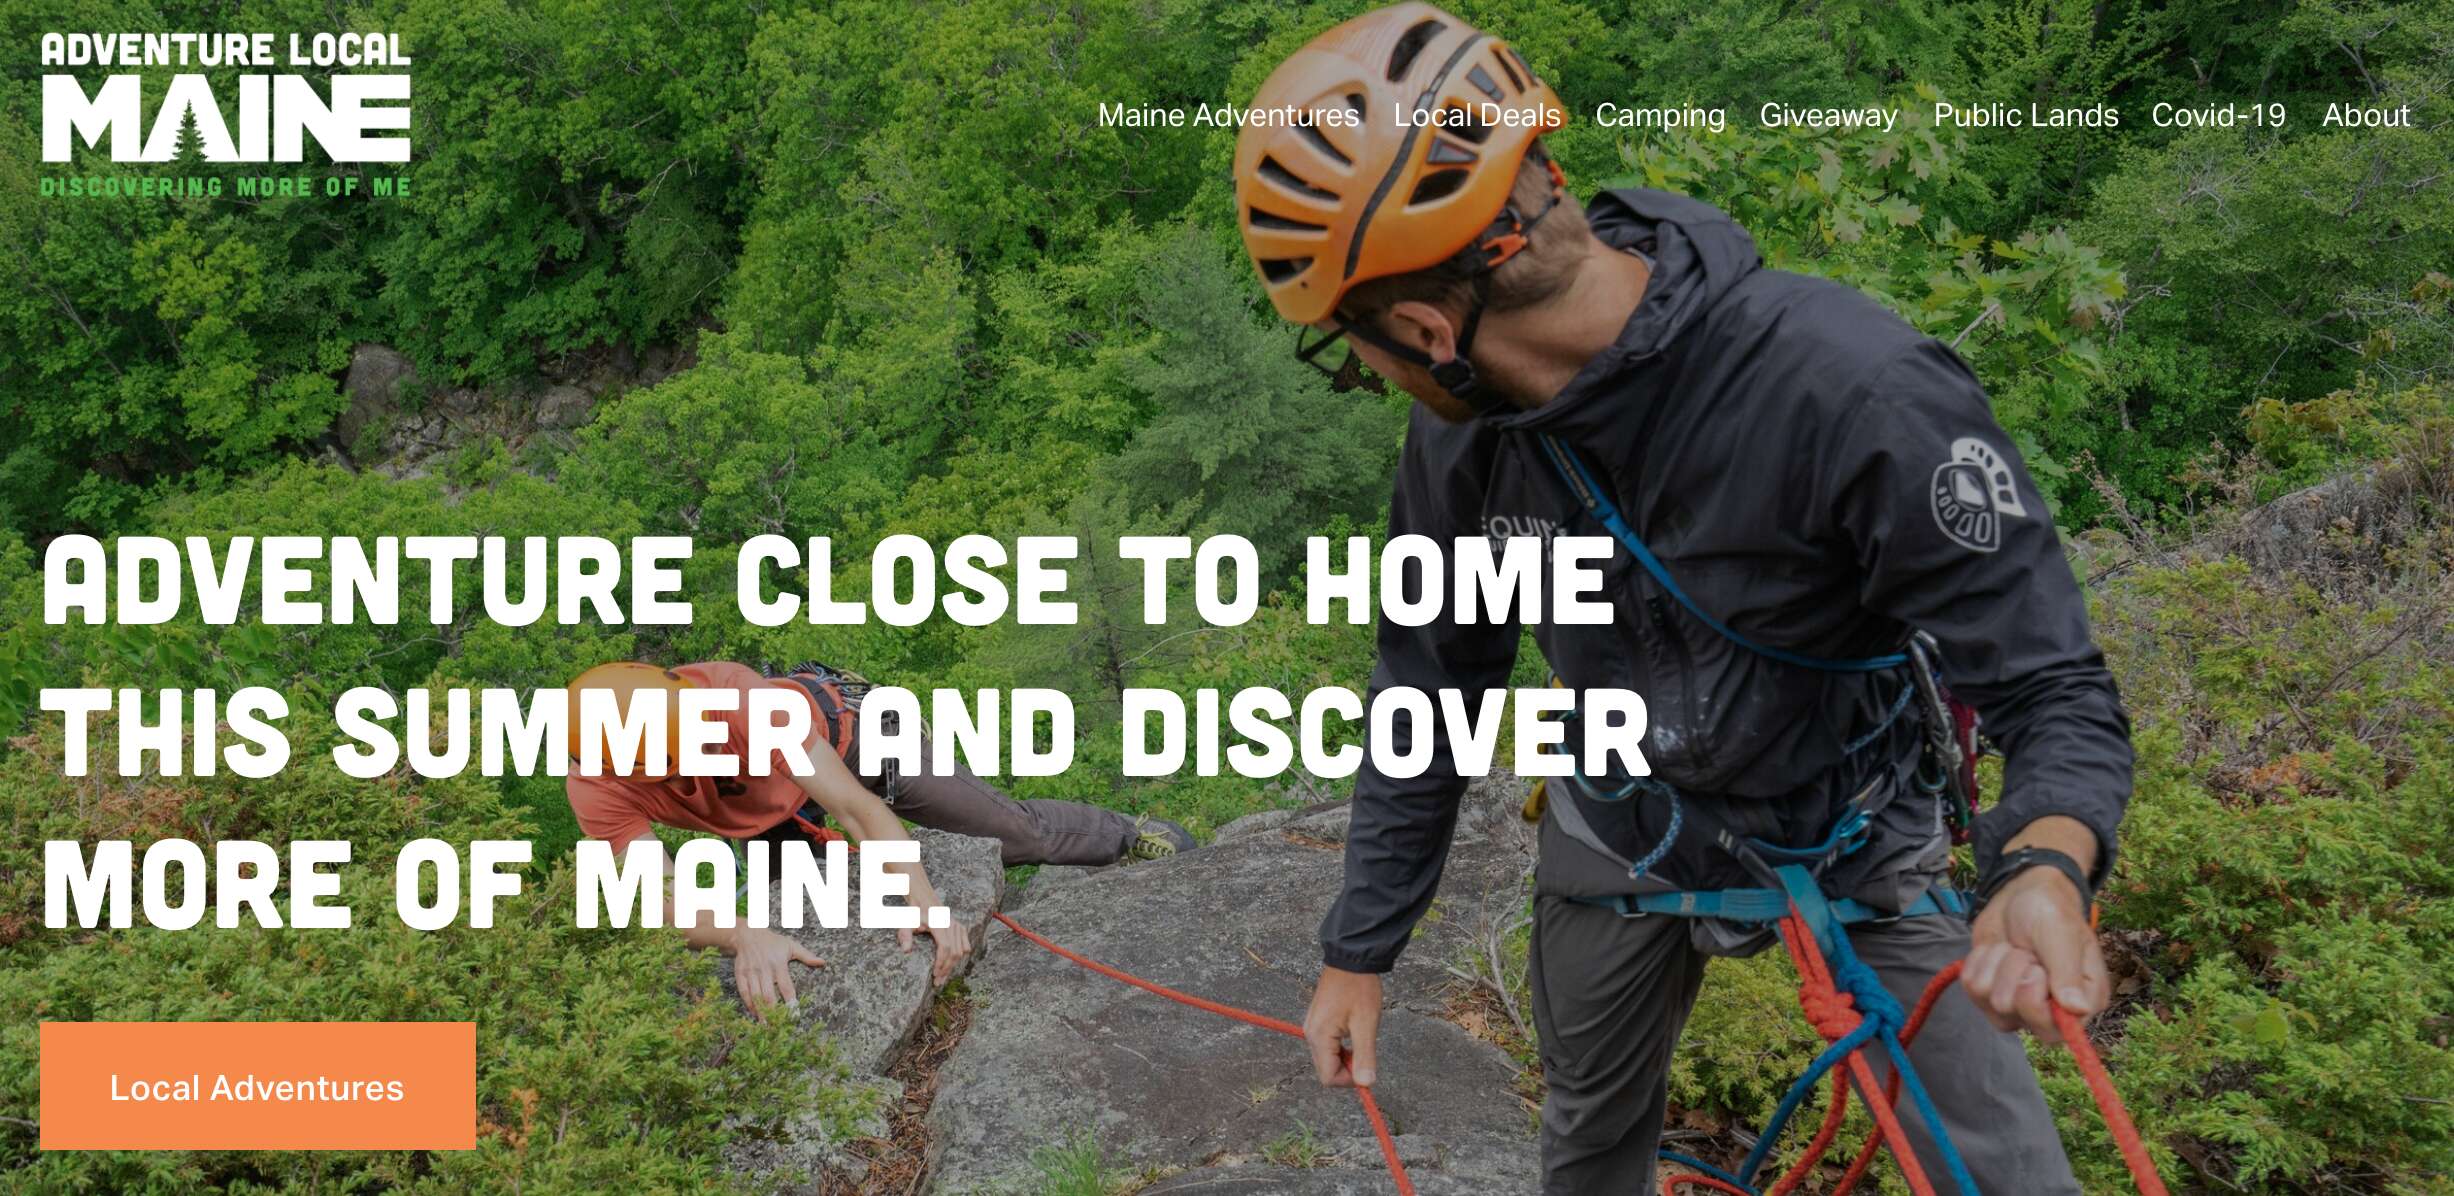 Screenshot  showing a biker and text: Adventure close to home this summer and discover more of Maine"